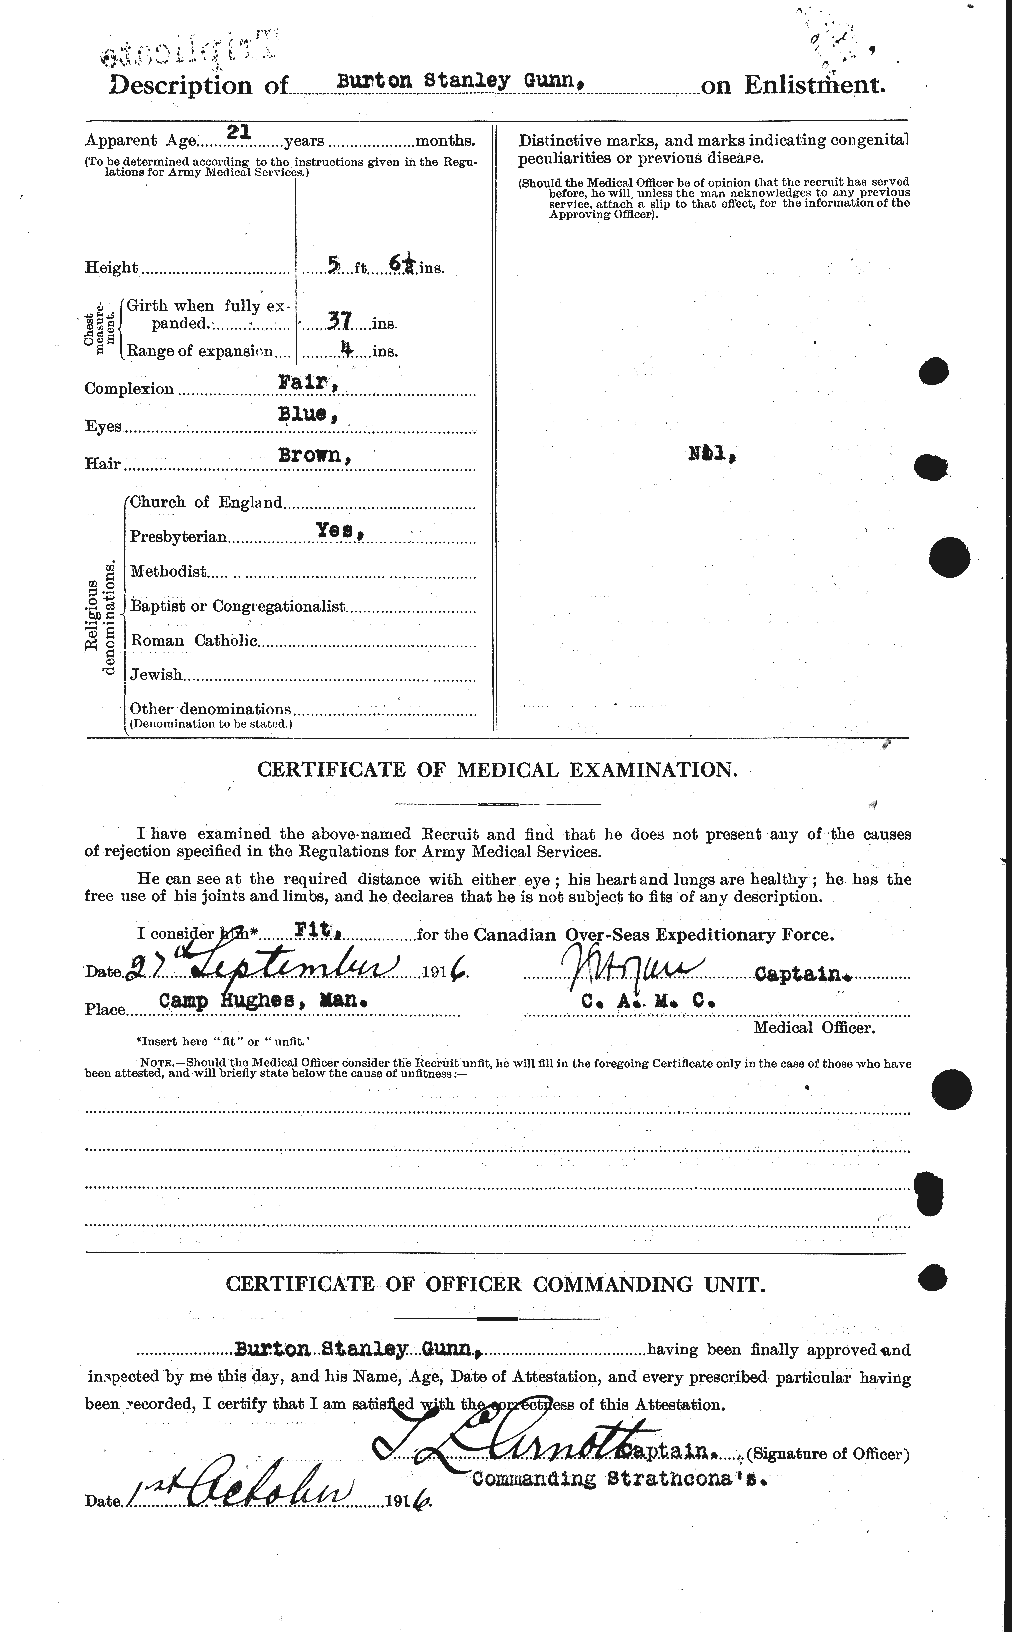 Personnel Records of the First World War - CEF 368007b